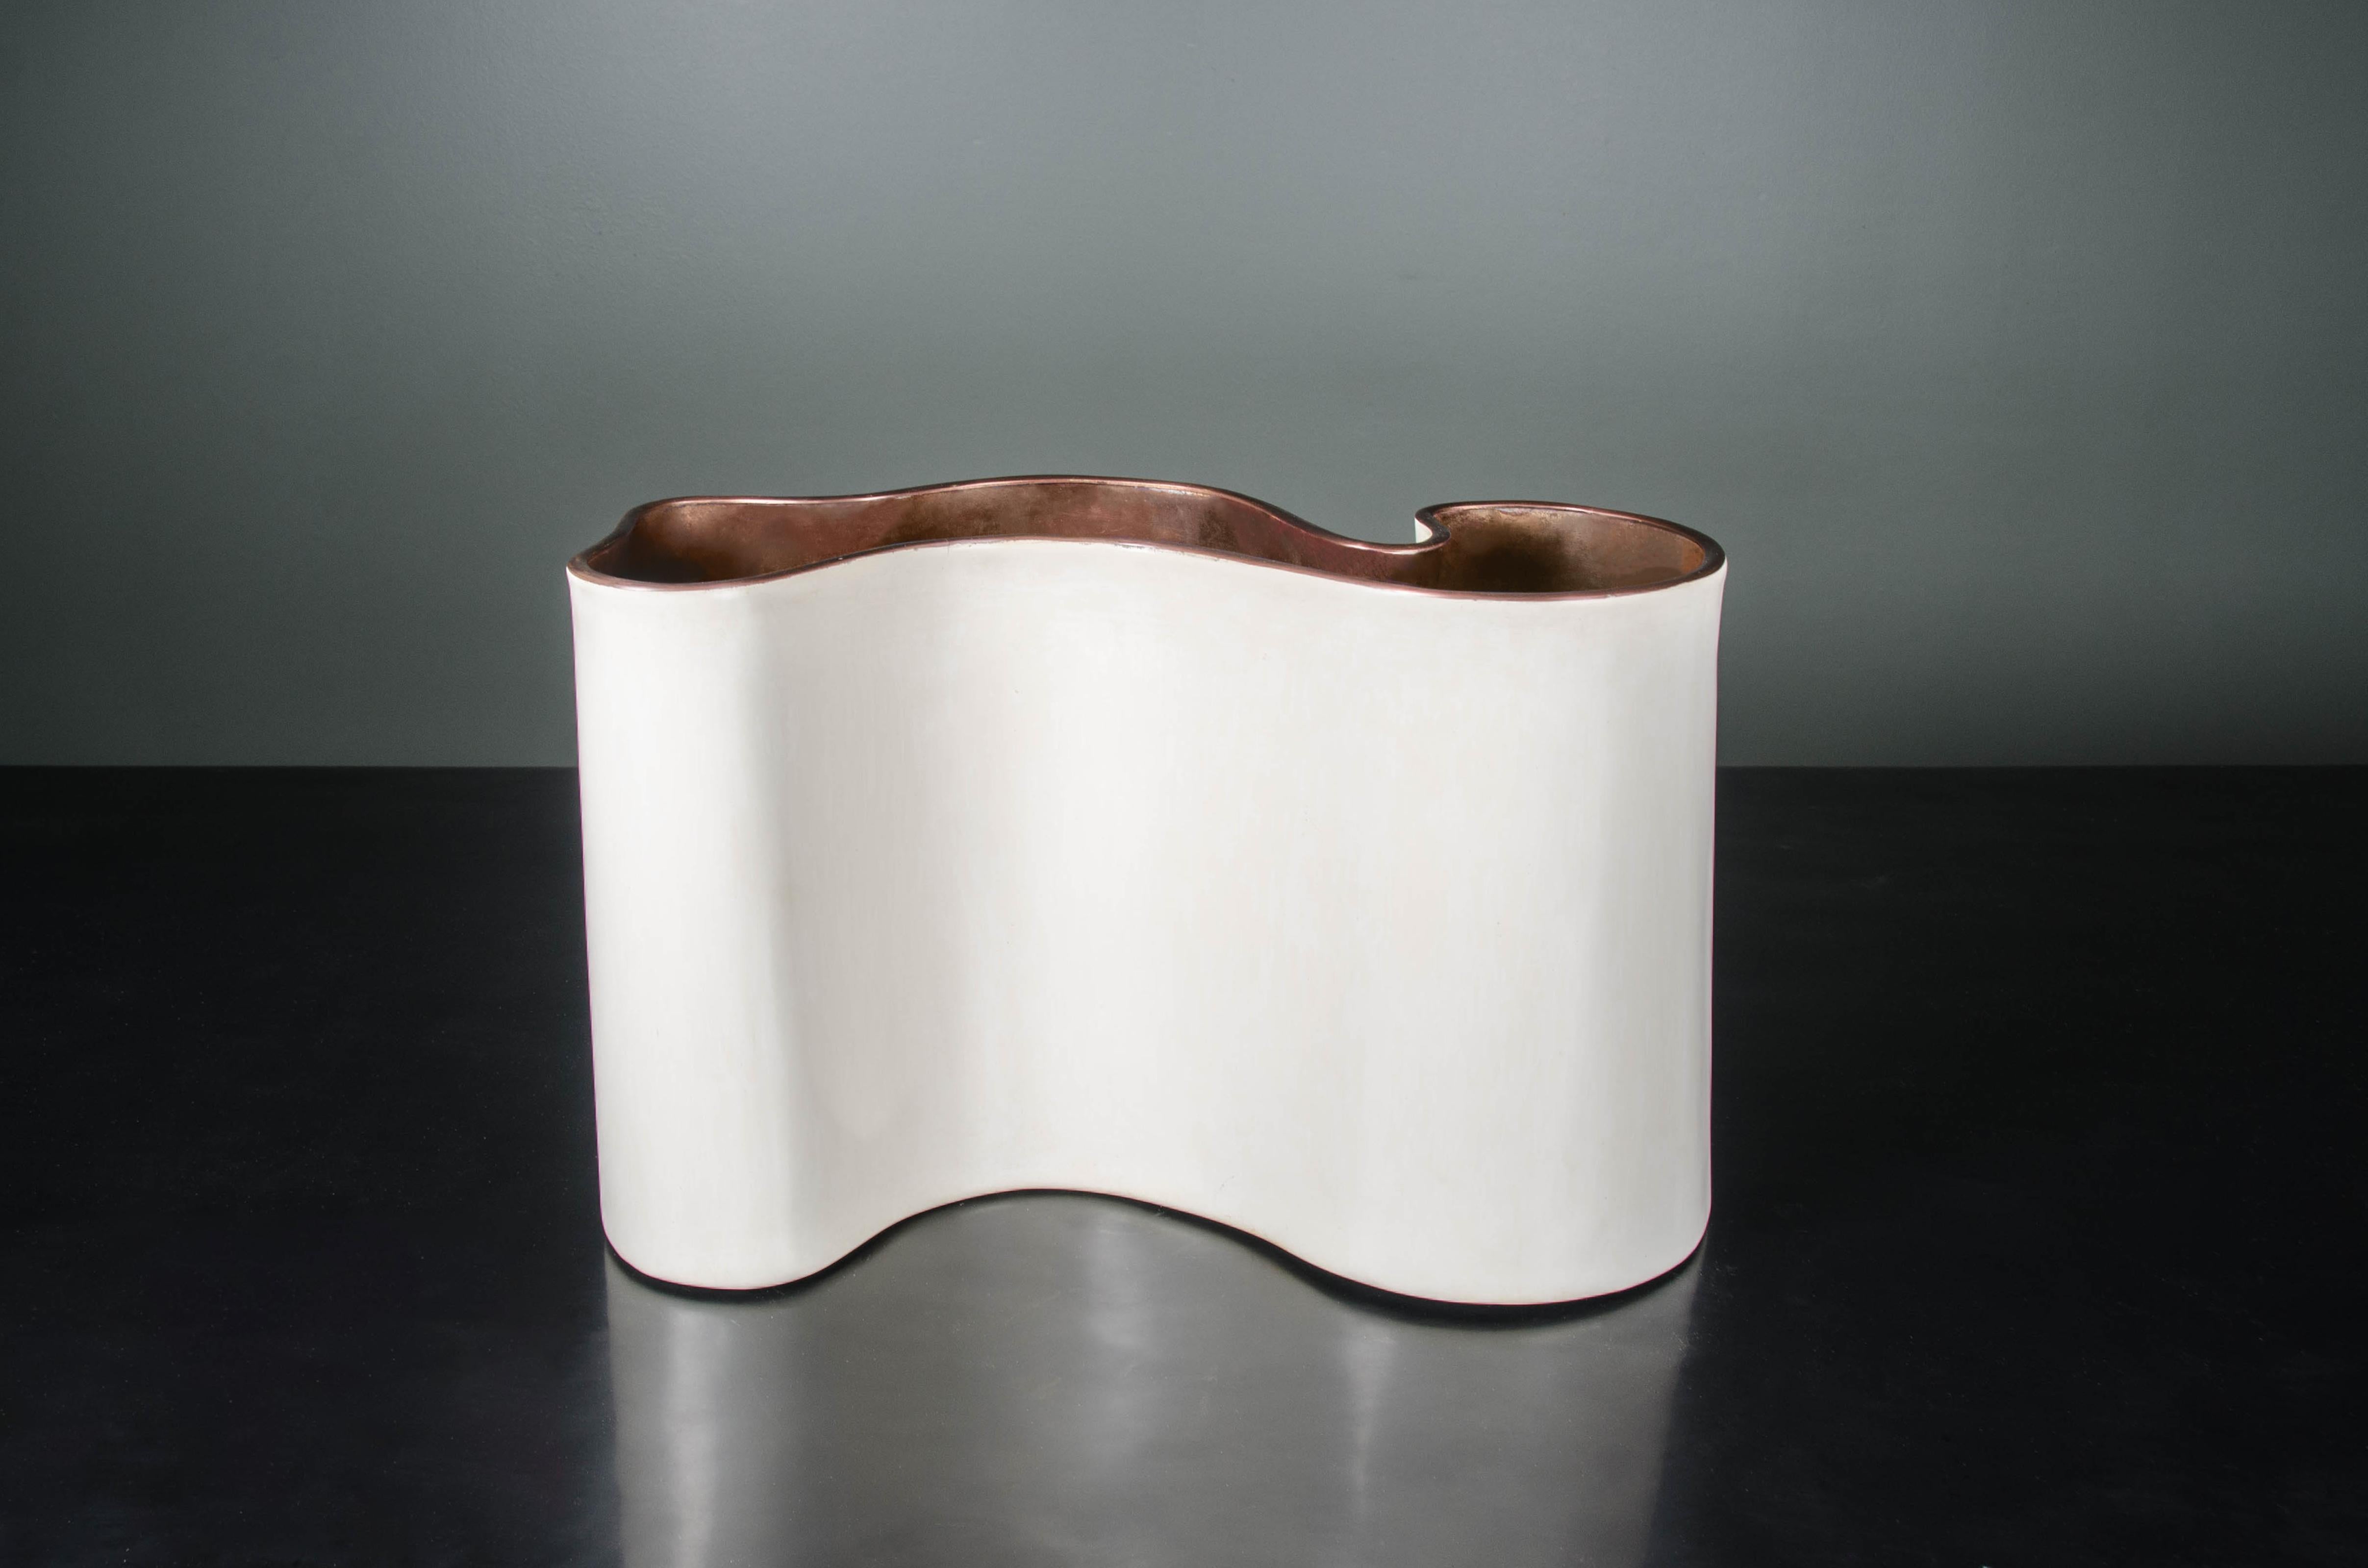 Cream Lacquer Hand Repoussé Root Vase with Copper Trim by Robert Kuo In New Condition For Sale In Los Angeles, CA